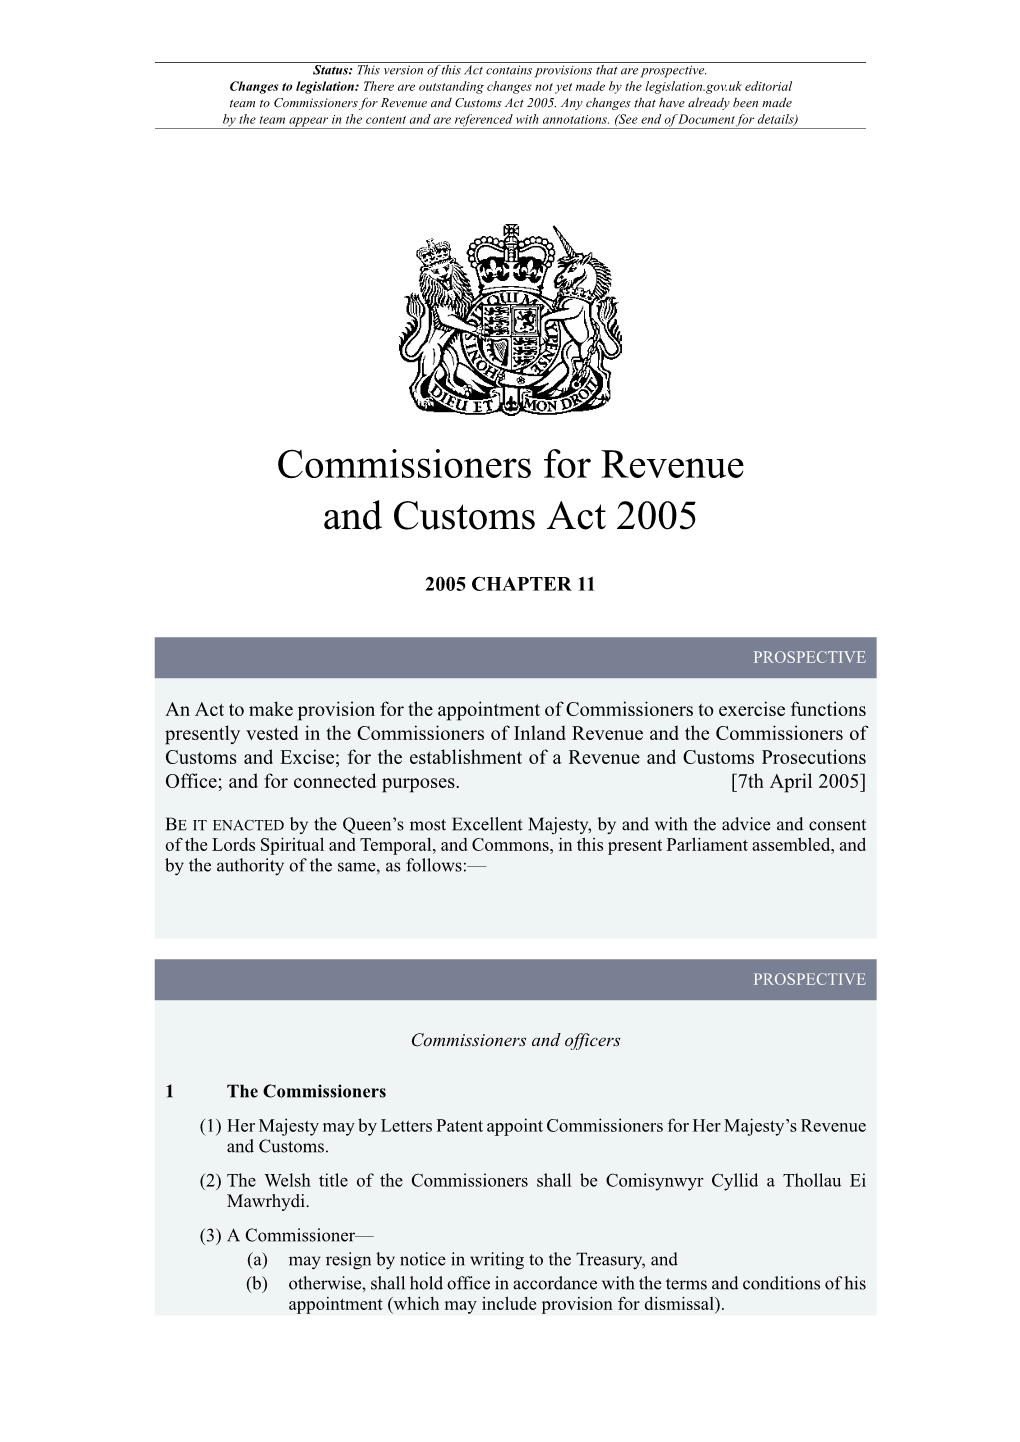 Commissioners for Revenue and Customs Act 2005